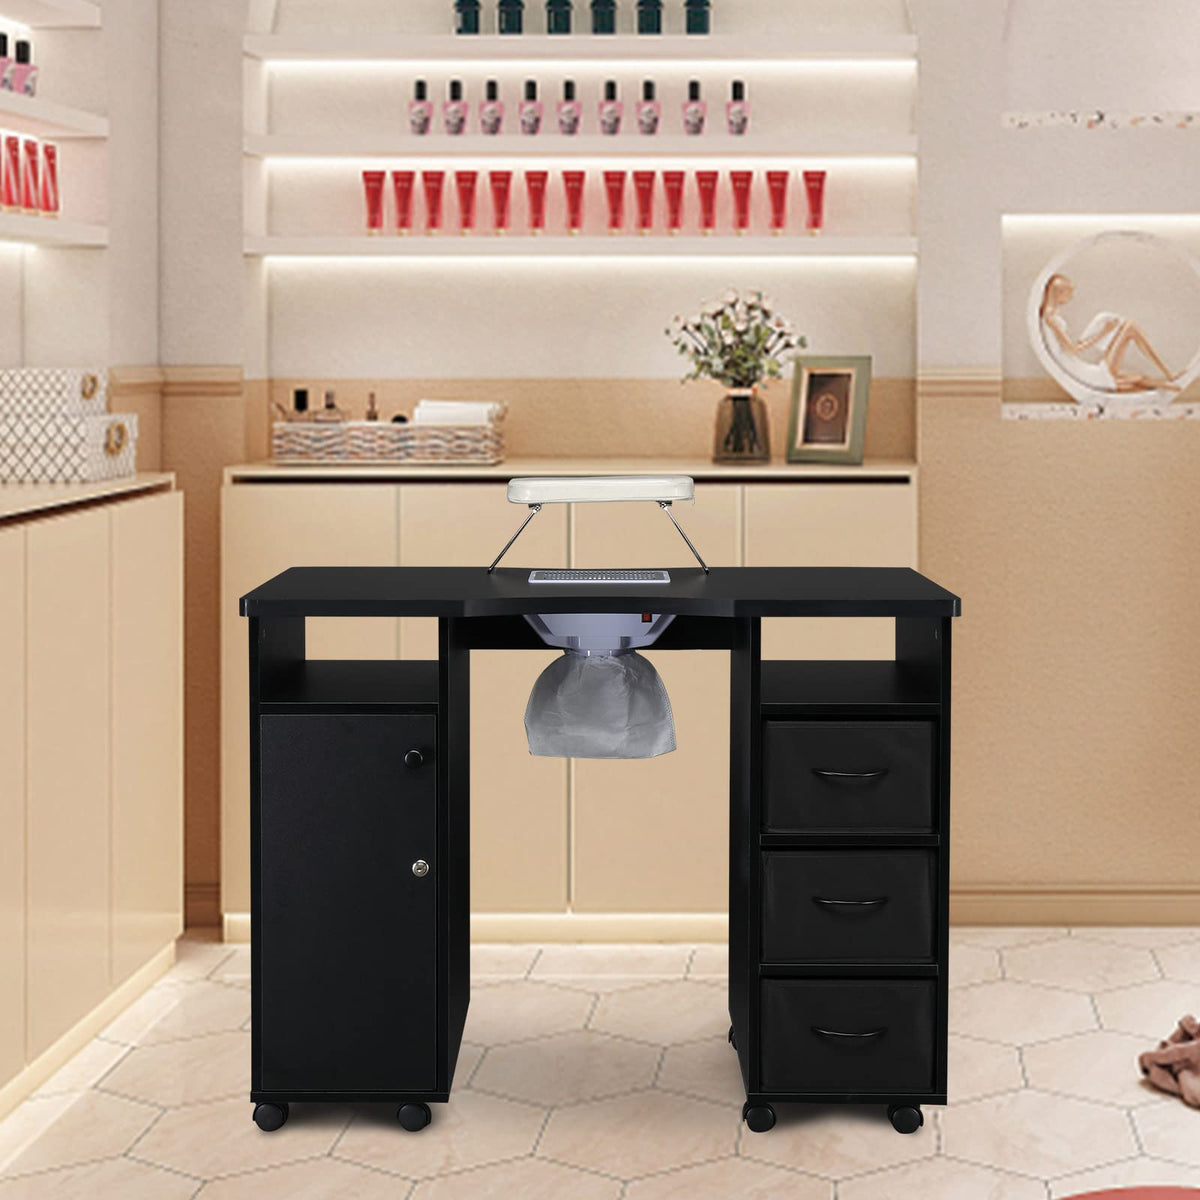 OmySalon Manicure Nail Table Double Cabinet 1 Door 3 Cloth Drawers with Dust Collector & Wrist Rest Cushion